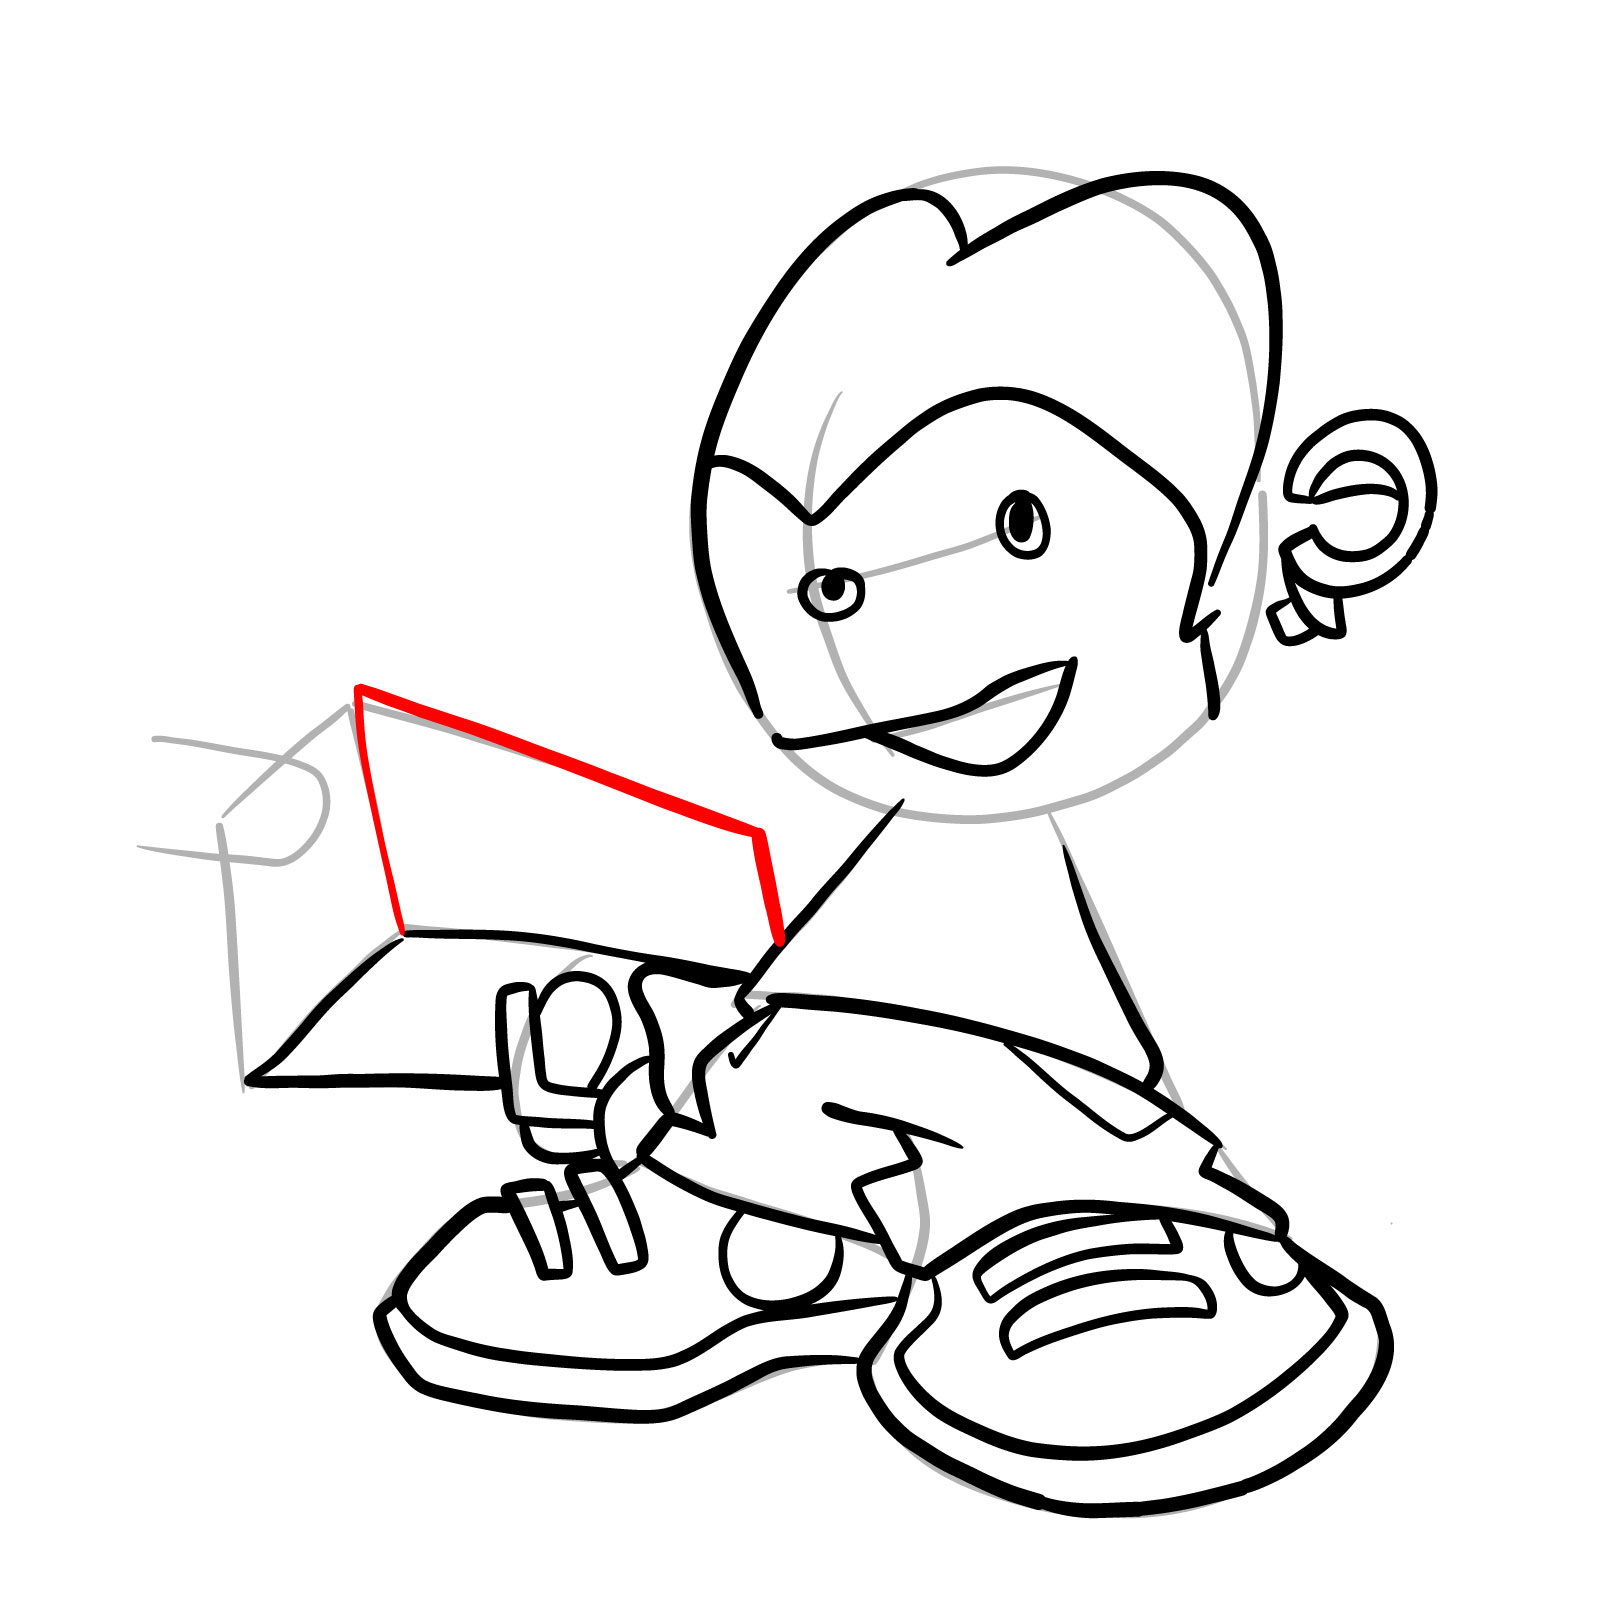 How to draw Pico - Pibby Corrupted - step 25